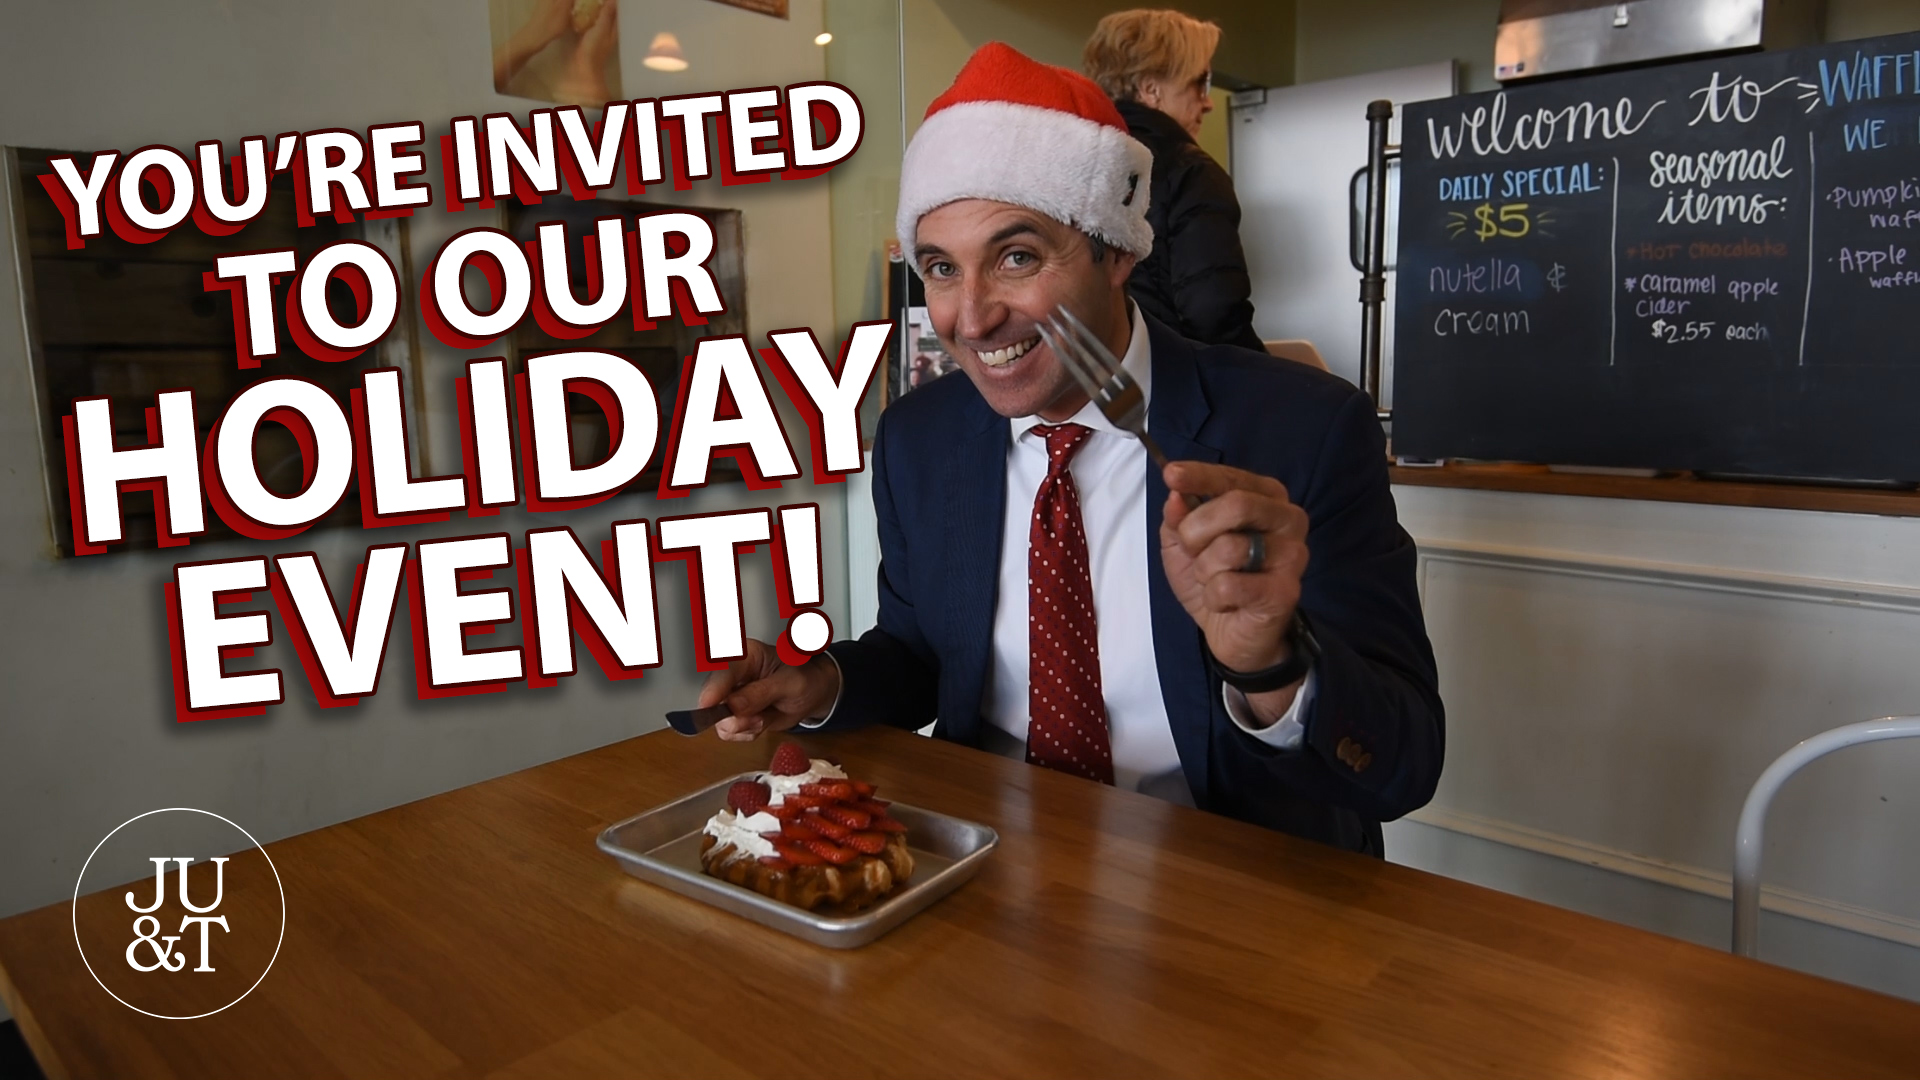 Our Holiday Client Event Is Coming Up